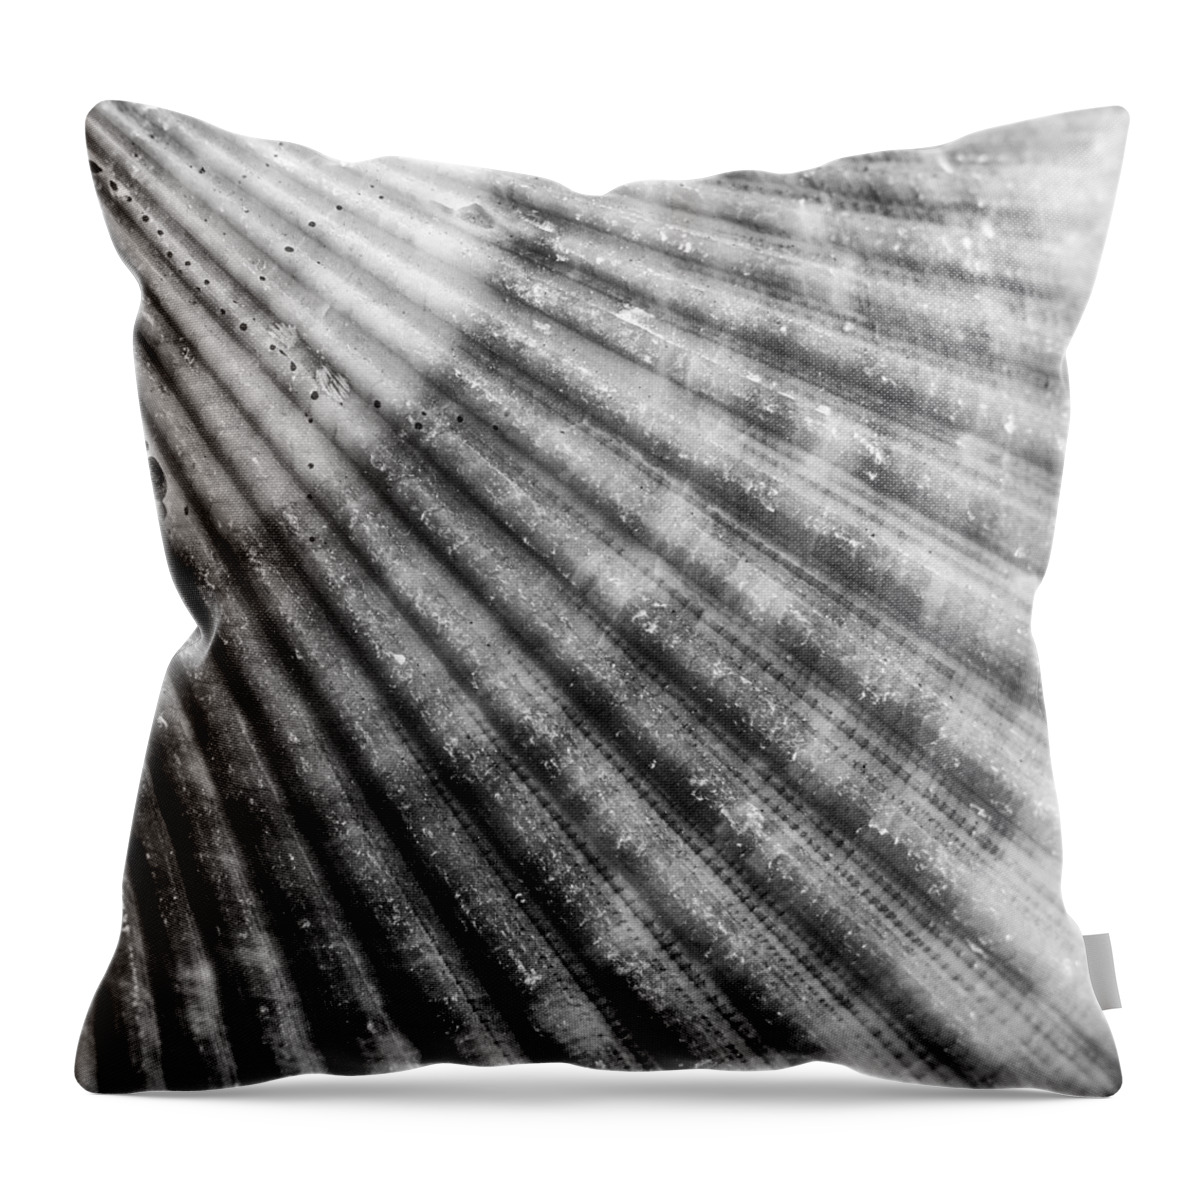 Shells Throw Pillow featuring the photograph Bay Scallop Macro by Hermes Fine Art